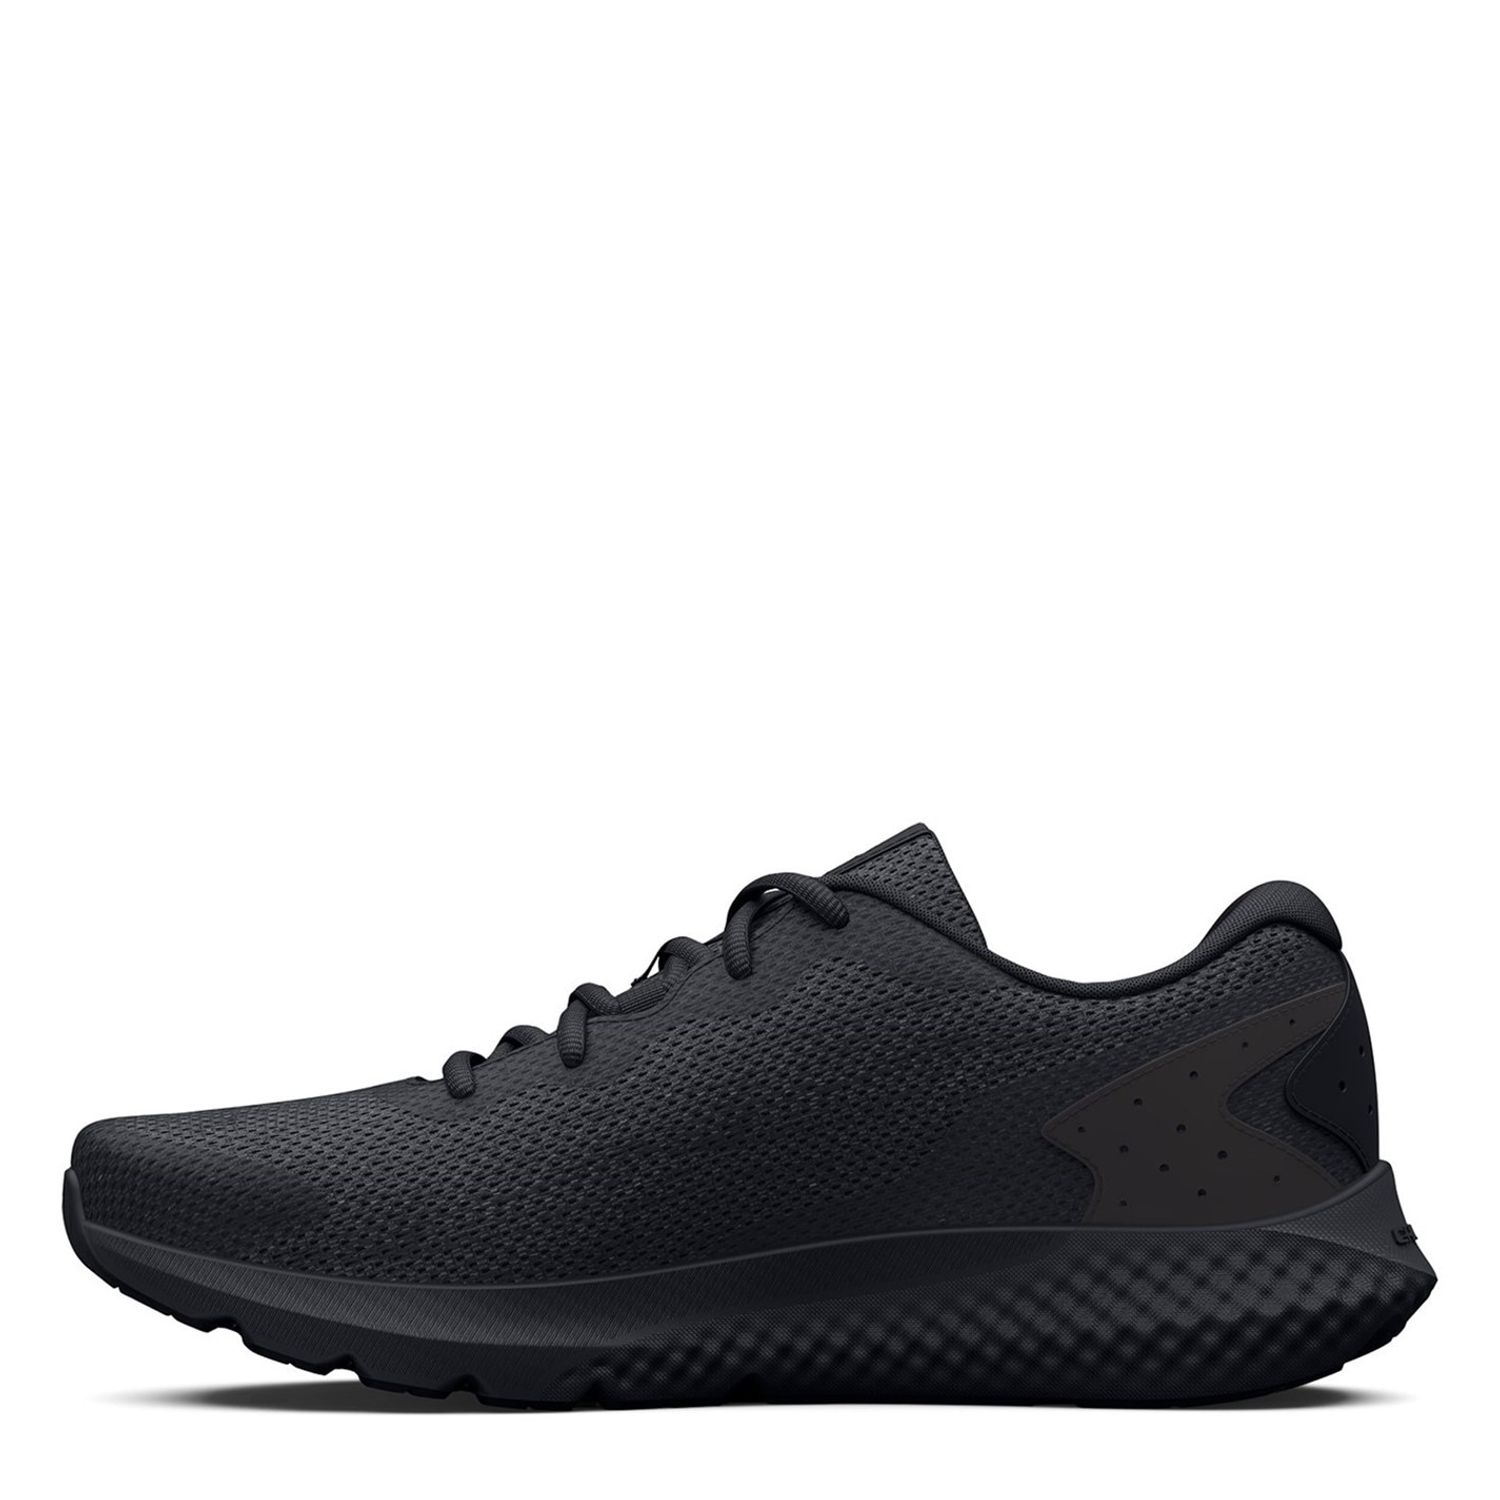 Black Under Armour Charged Rogue 3 Knit - Get The Label